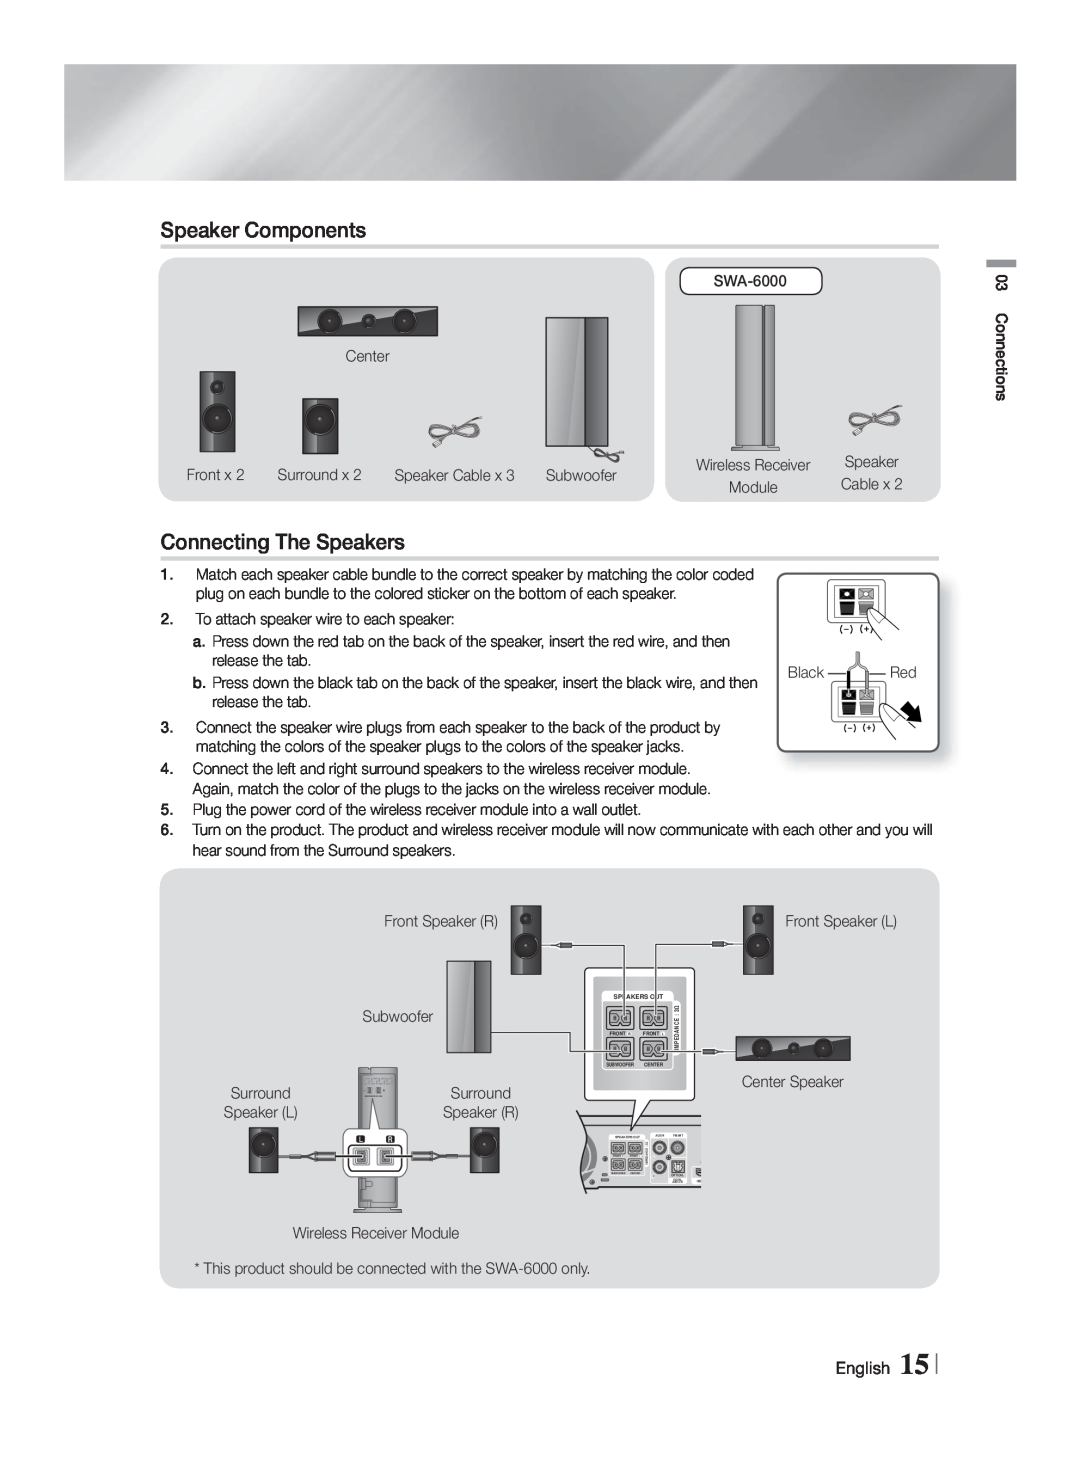 Samsung HTF5500WZA, HT-F5500W user manual Speaker Components, Connecting The Speakers, English 